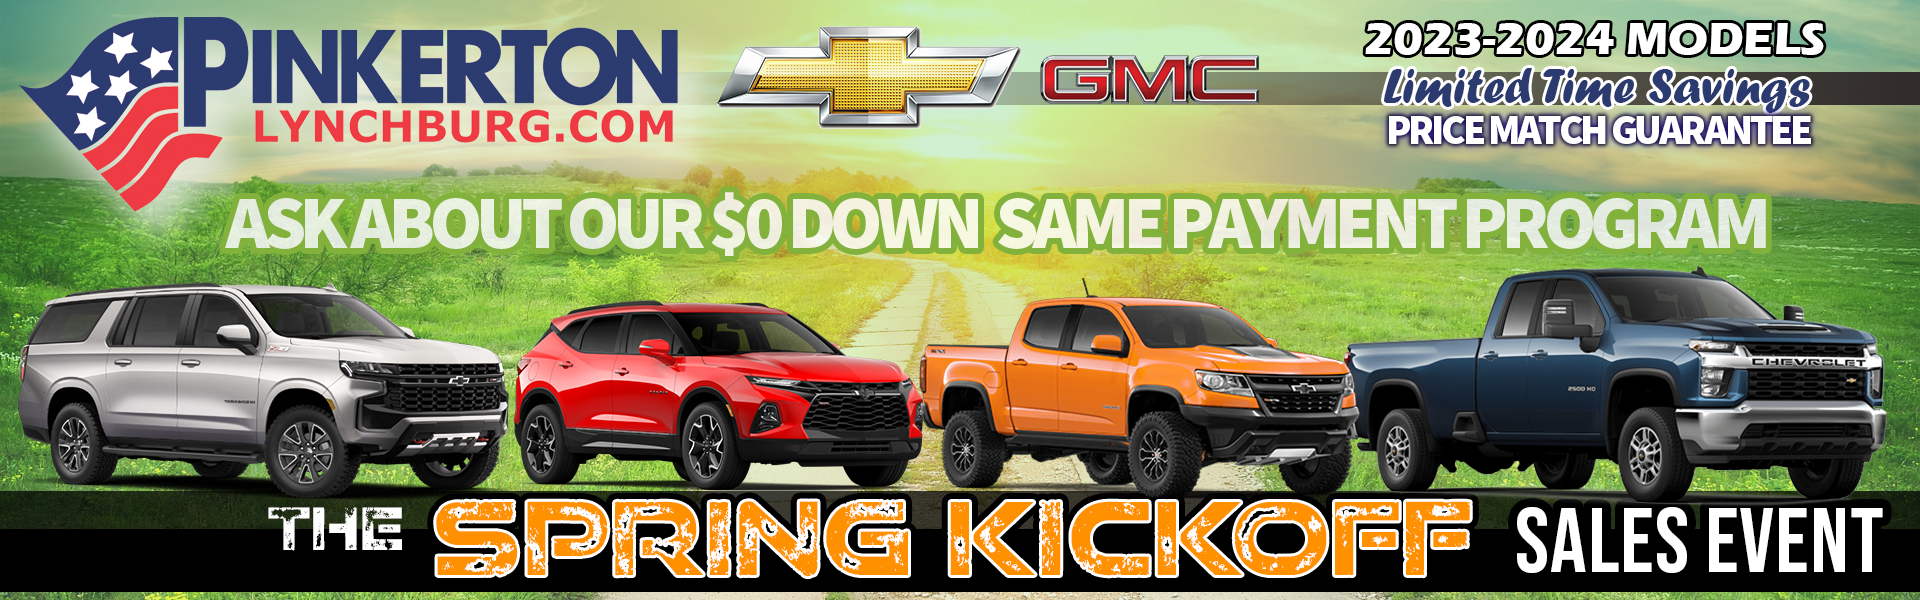 The Spring Kickoff Sales Event